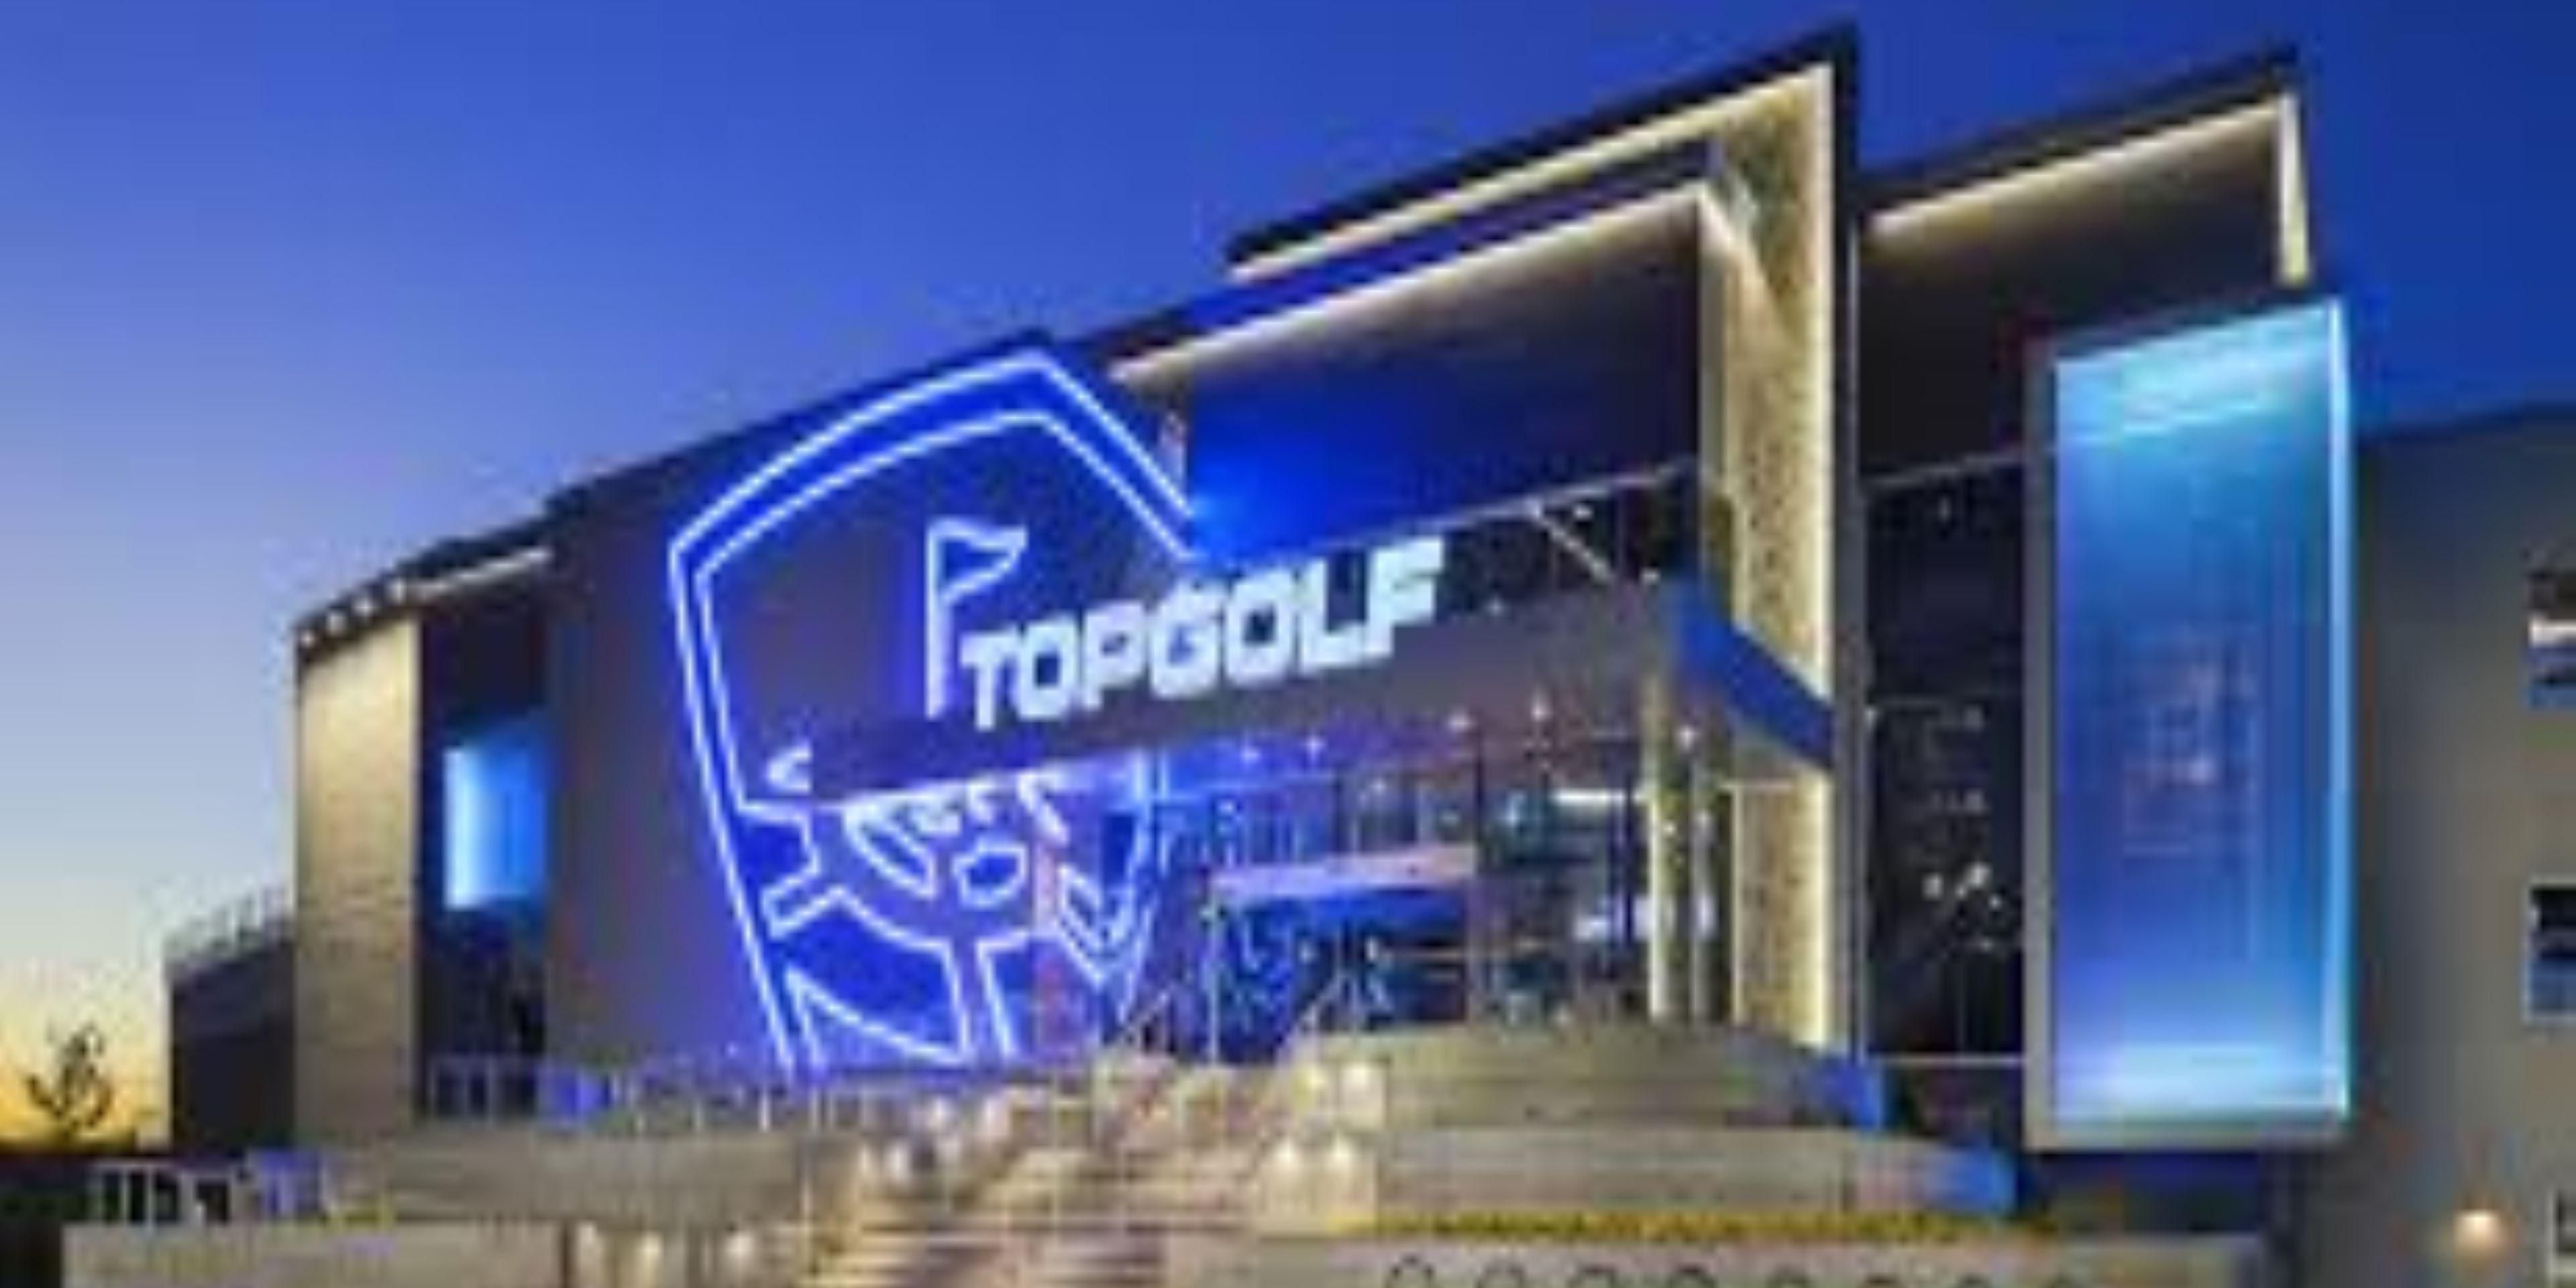 Enjoy at day at Top Golf your premier entertainment destination.   A place where you can come for bachelor or bachelorette parties, corporate events, date nights, or just a night out with friends, and everyone will have a great time. 
No matter the occasion!